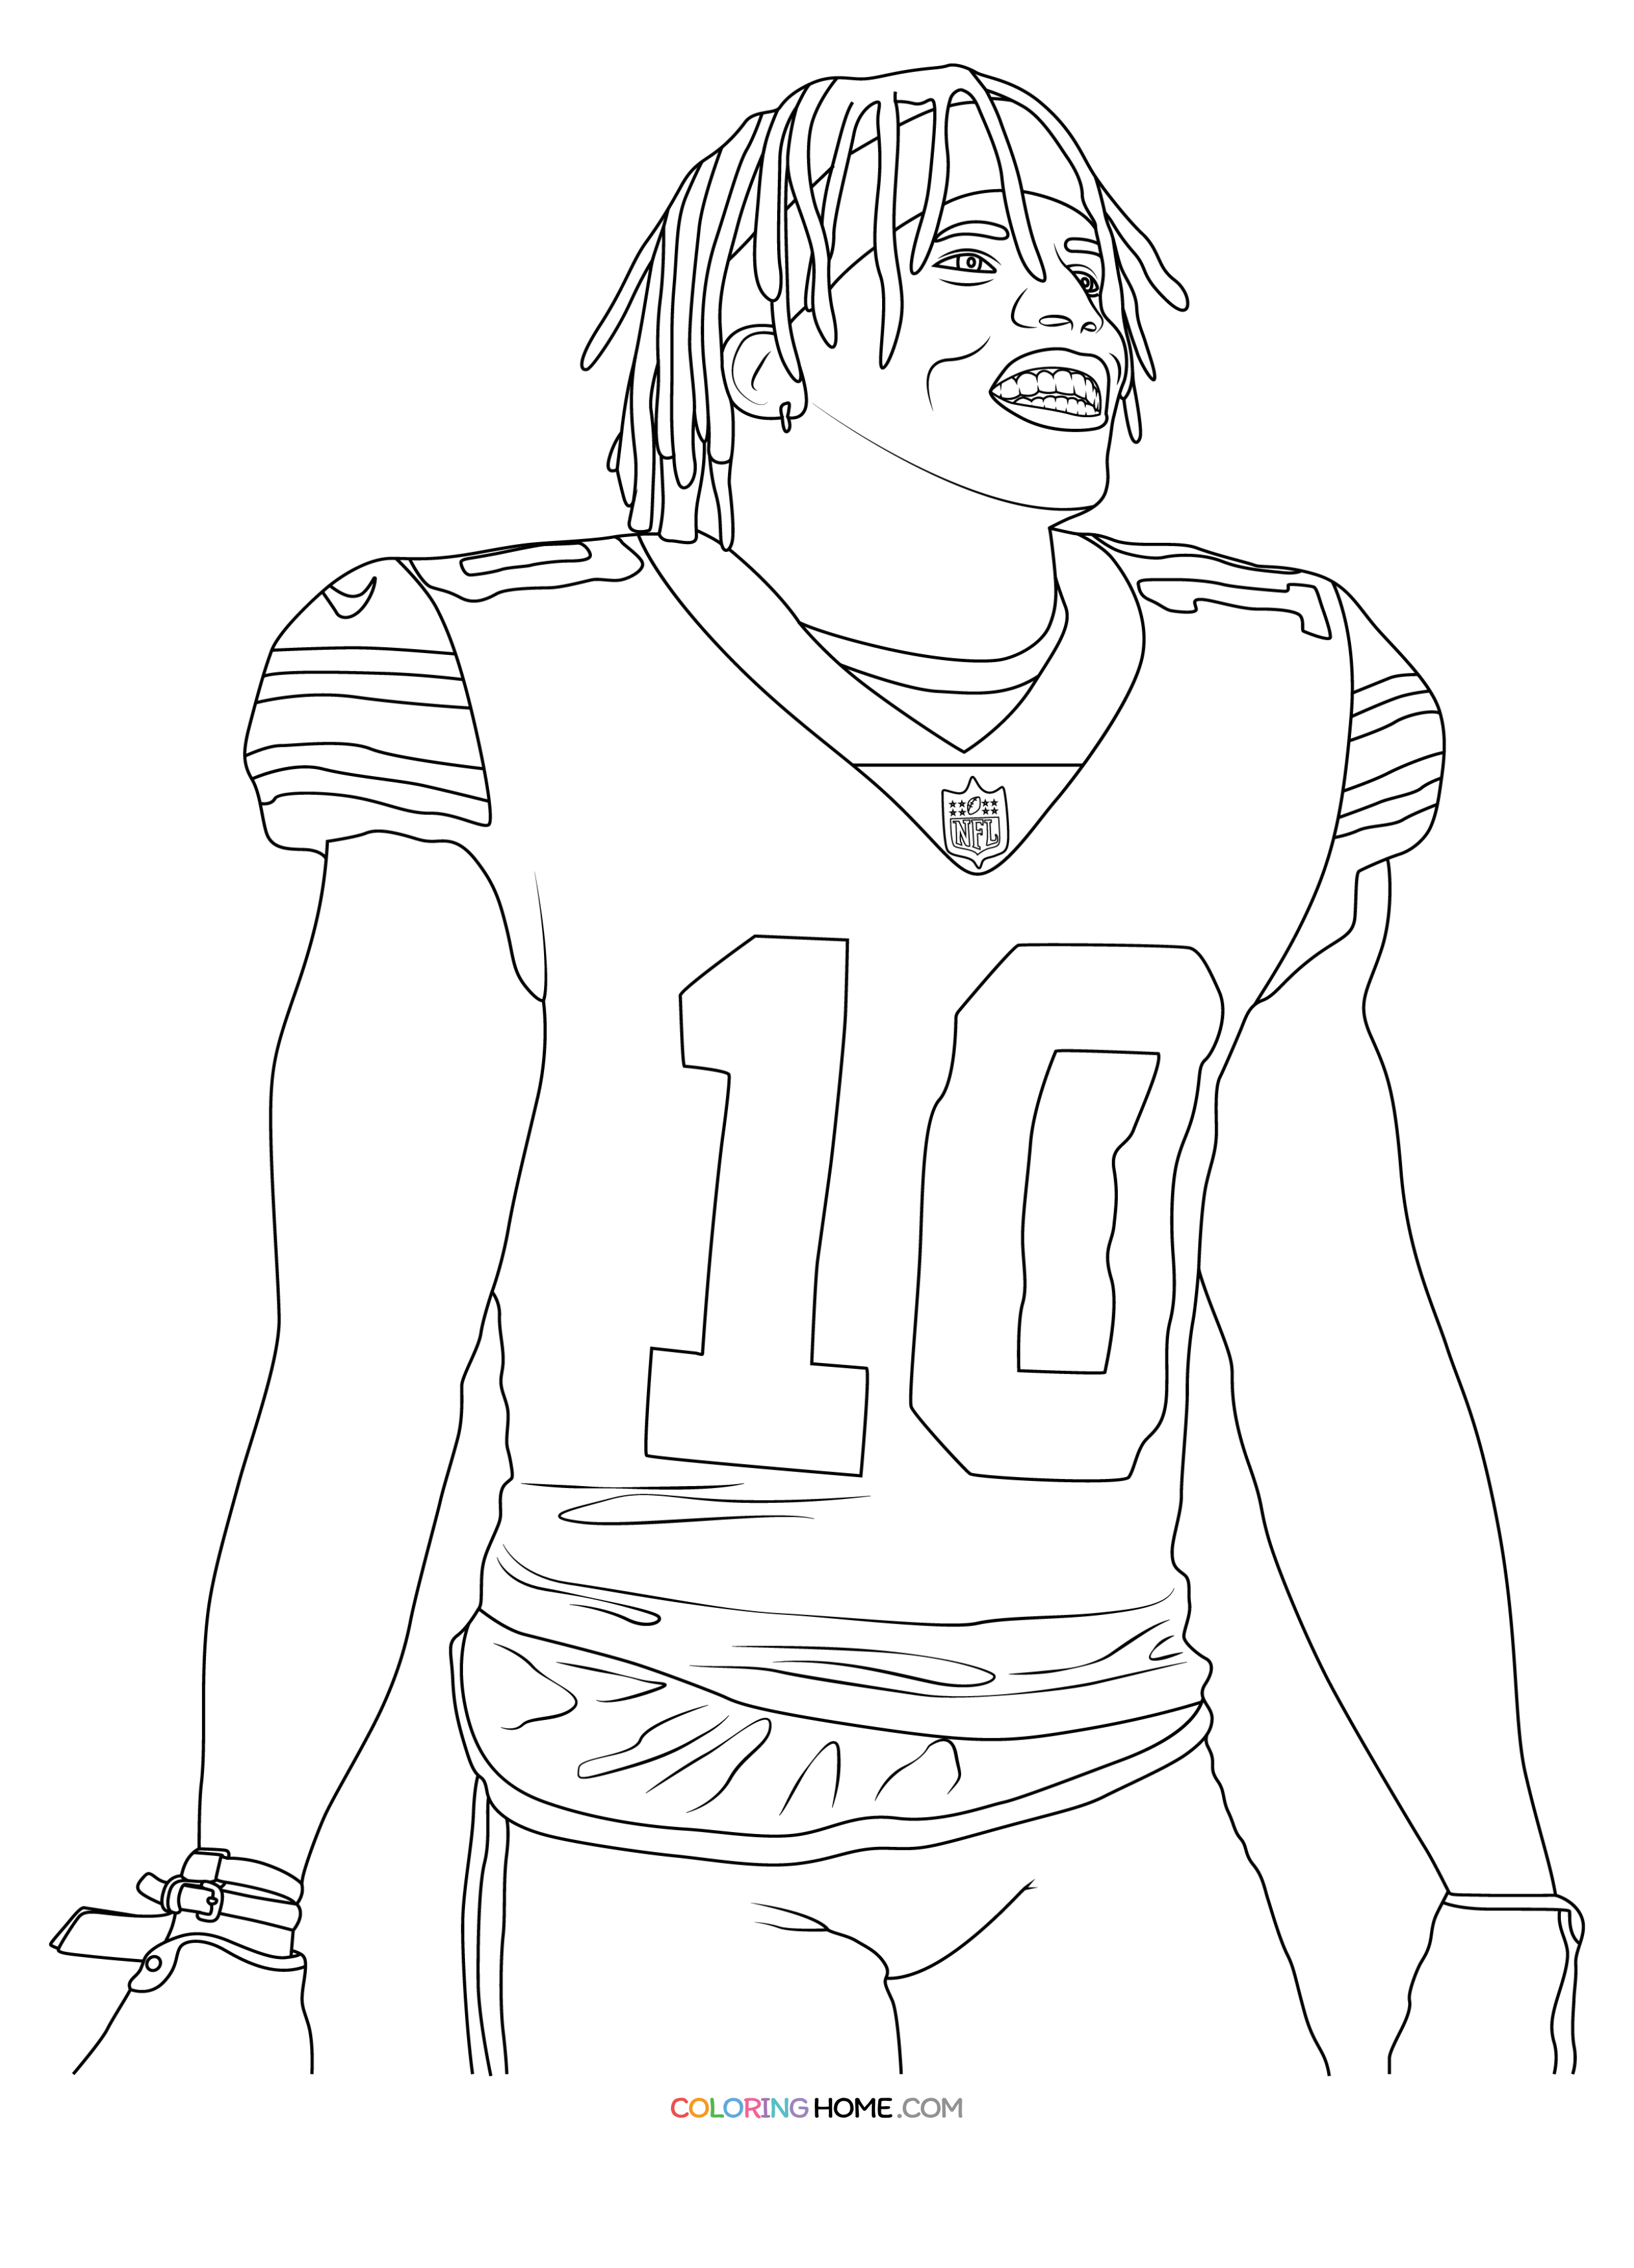 Tyreek Hill coloring page